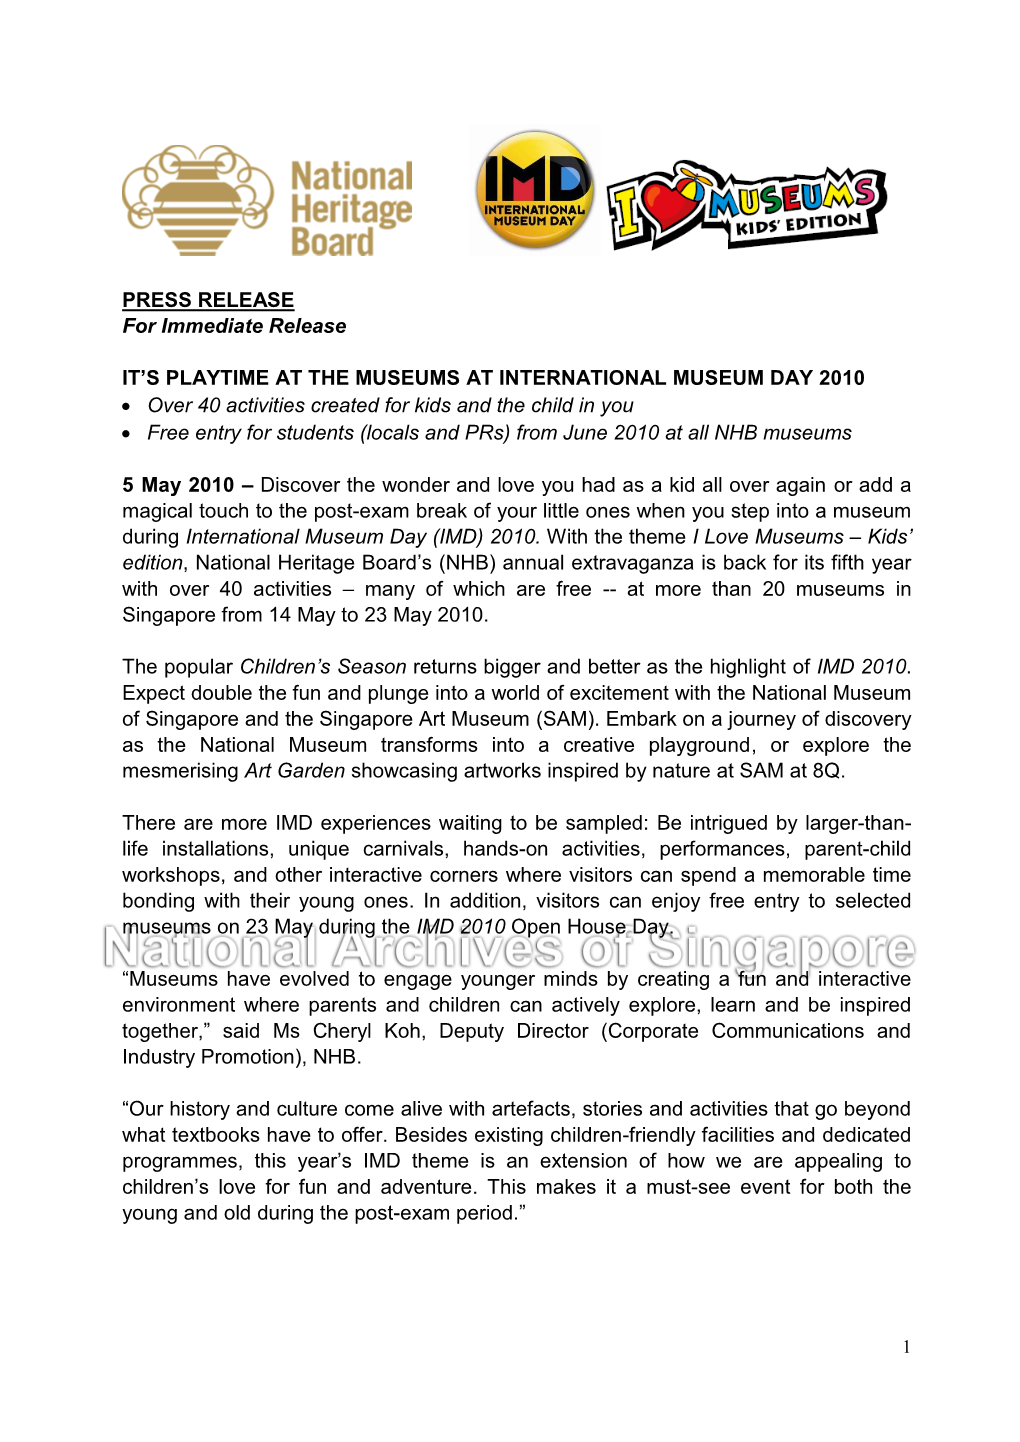 PRESS RELEASE for Immediate Release IT's PLAYTIME at the MUSEUMS at INTERNATIONAL MUSEUM DAY 2010 • Over 40 Activities Creat